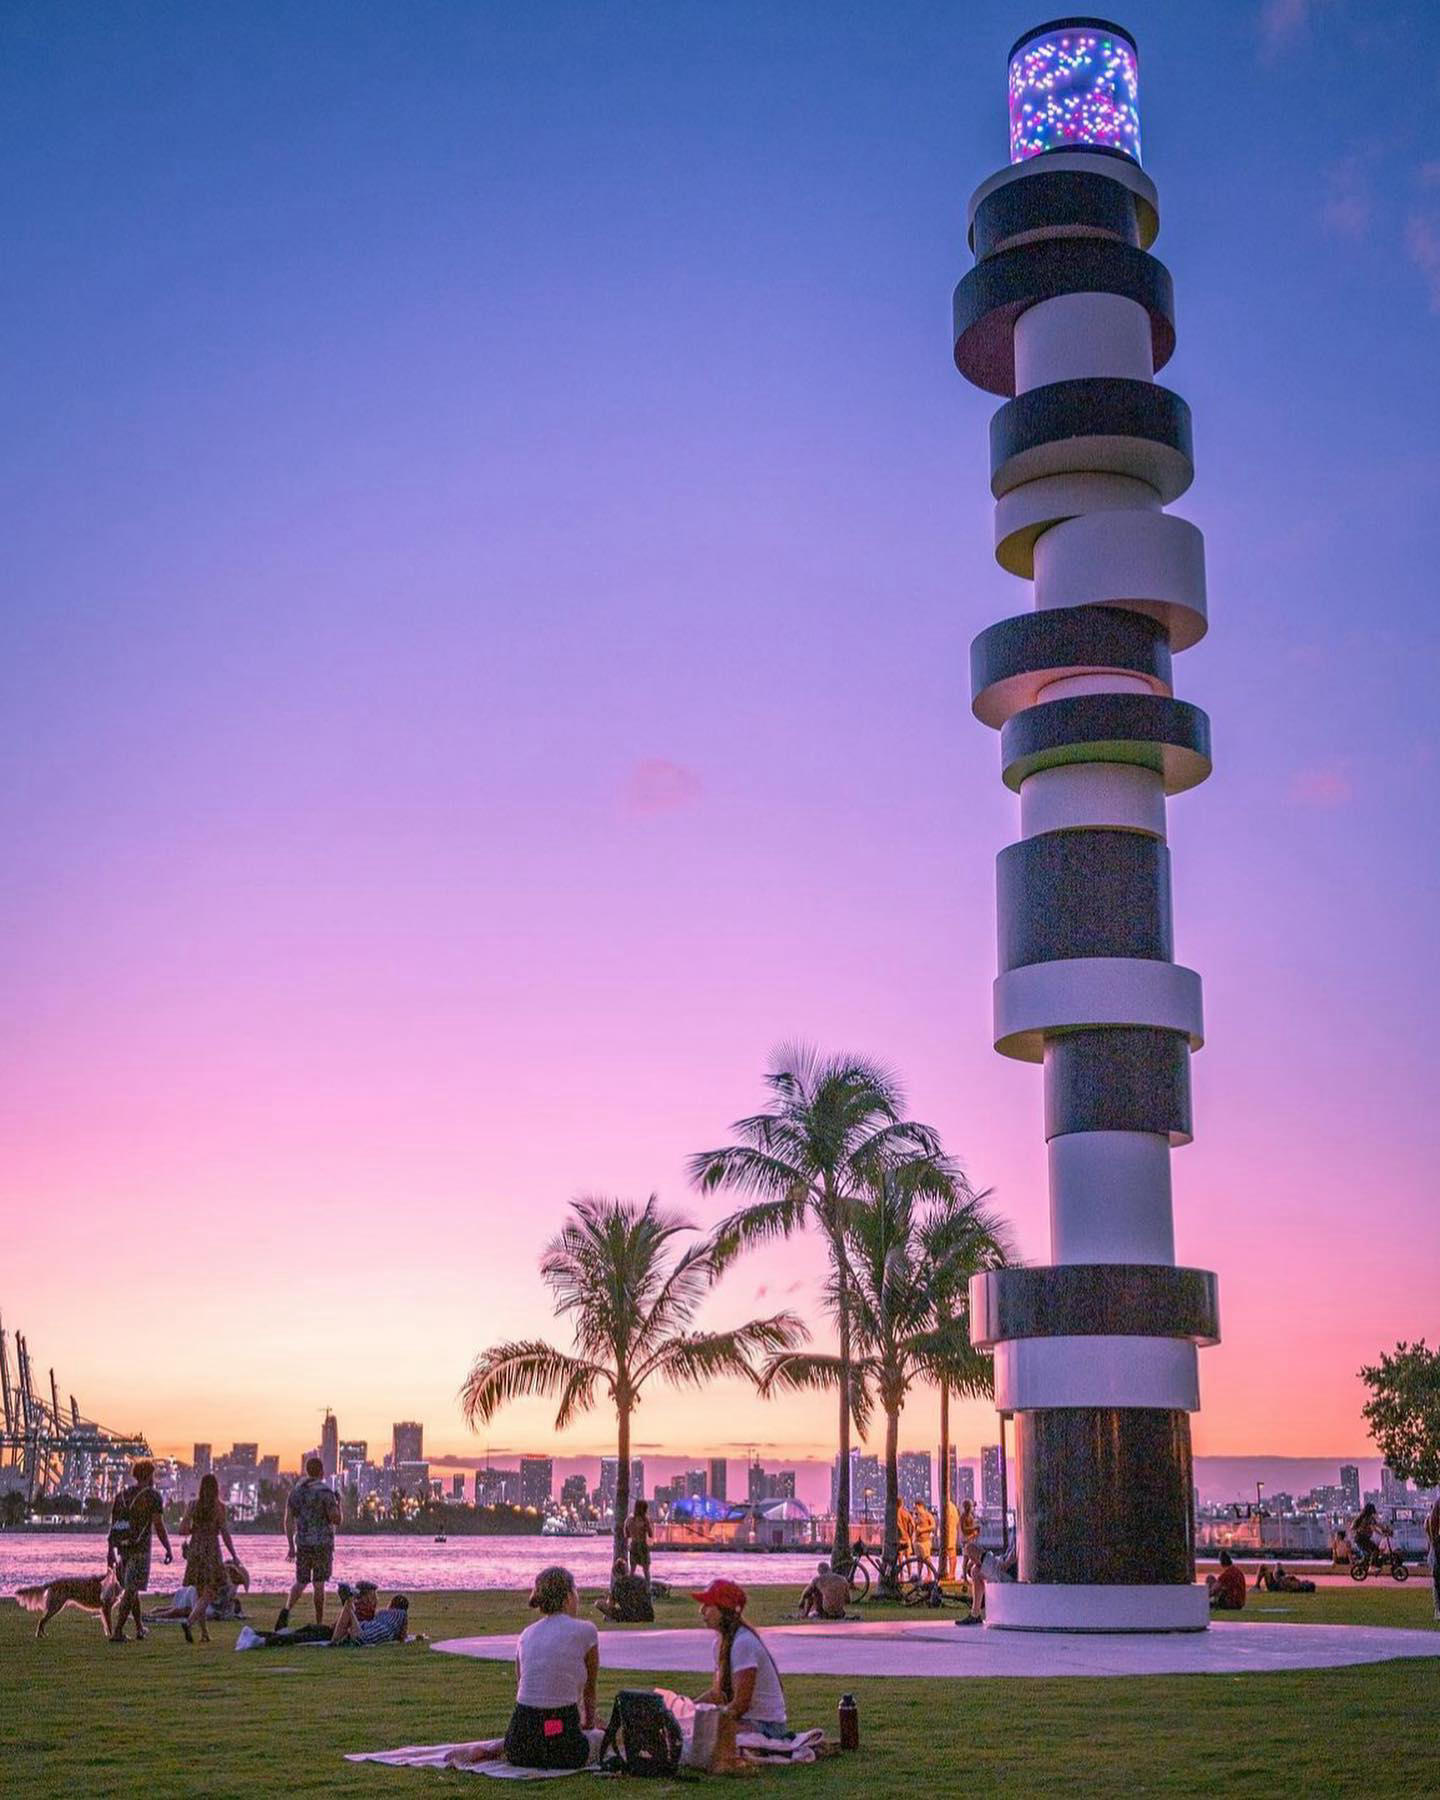 Miami - South Pointe park in Miami Beach, is one of the best spots to watch the sunset in the city